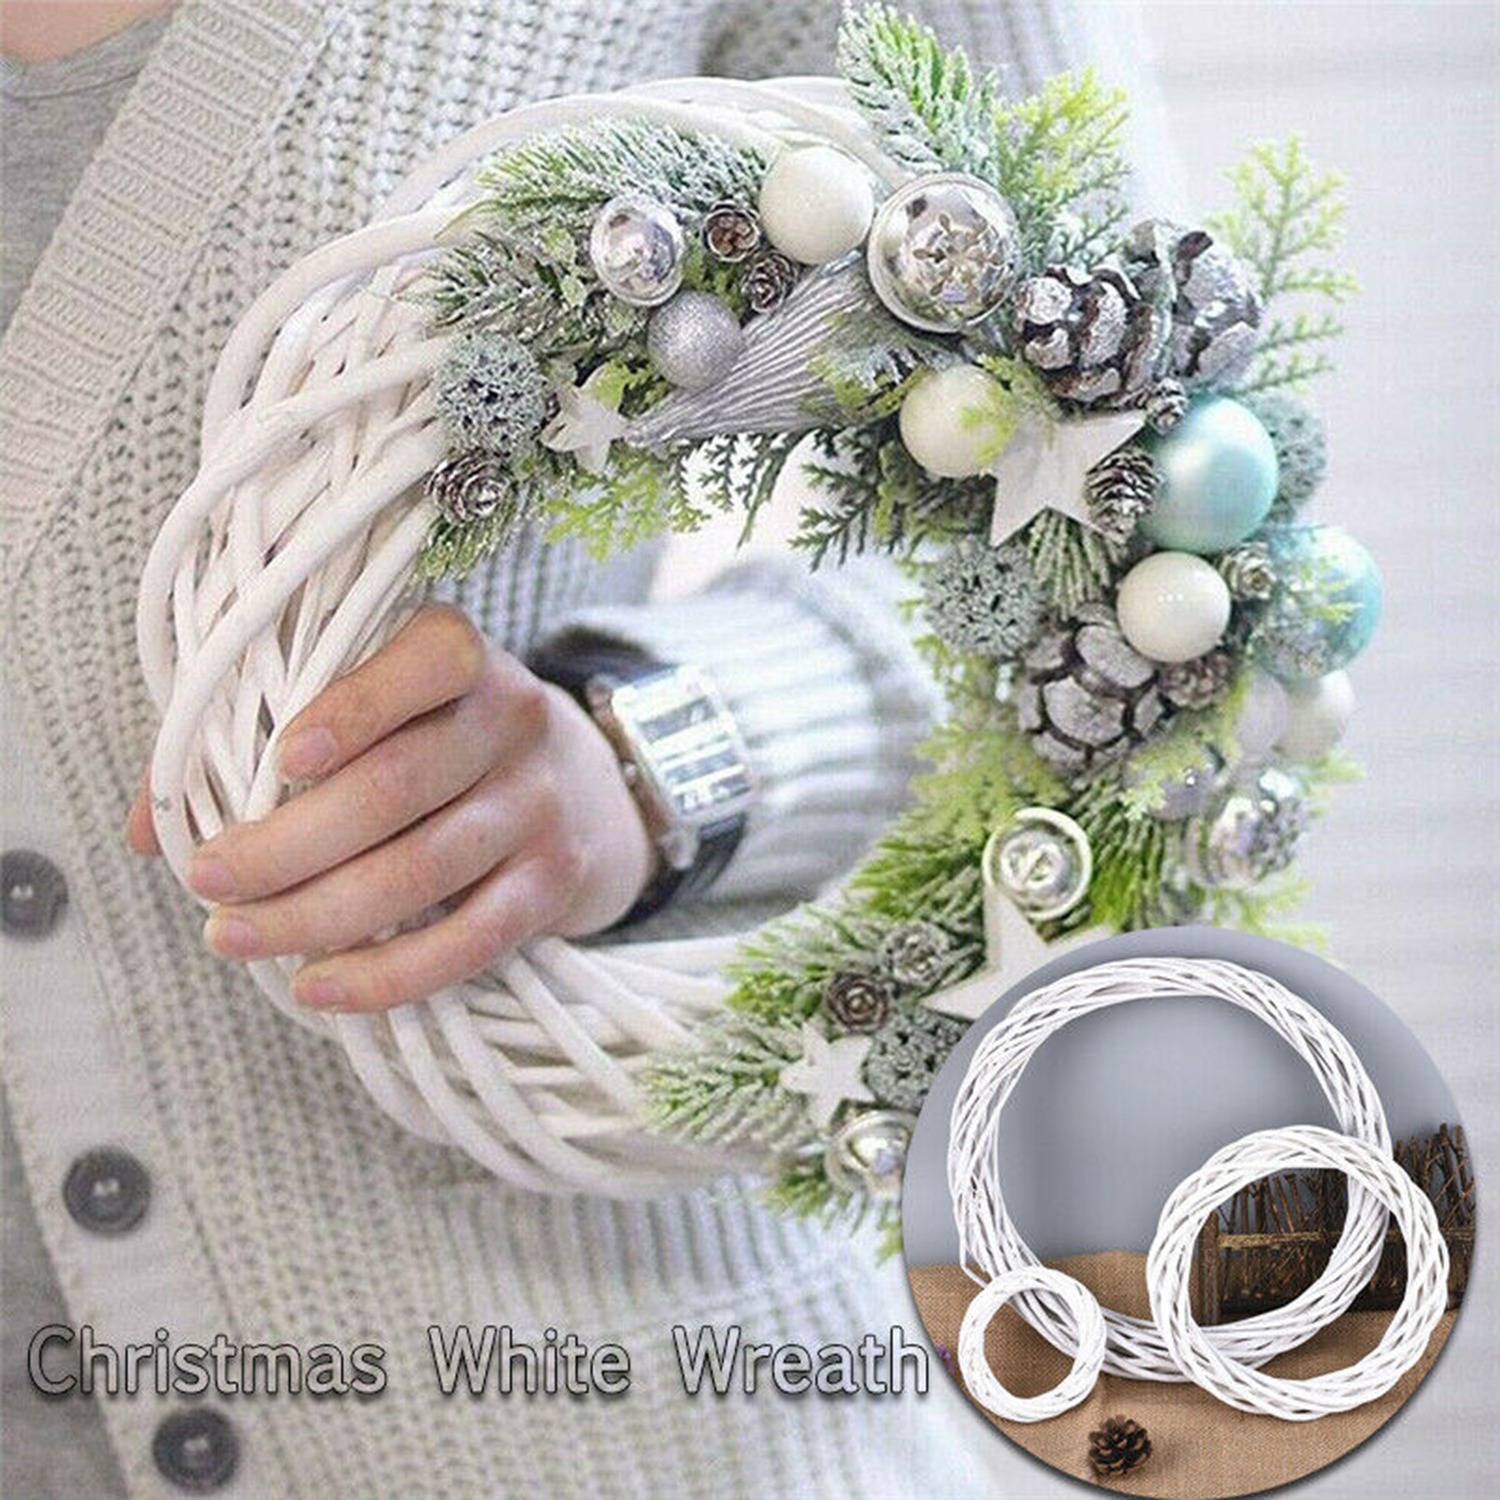 PLLEWY 10-30CM Home Xmas Party Decorations Window Door Ornaments White Wreath Wreath Wicker Christmas Rattan Ring Garland Hanging